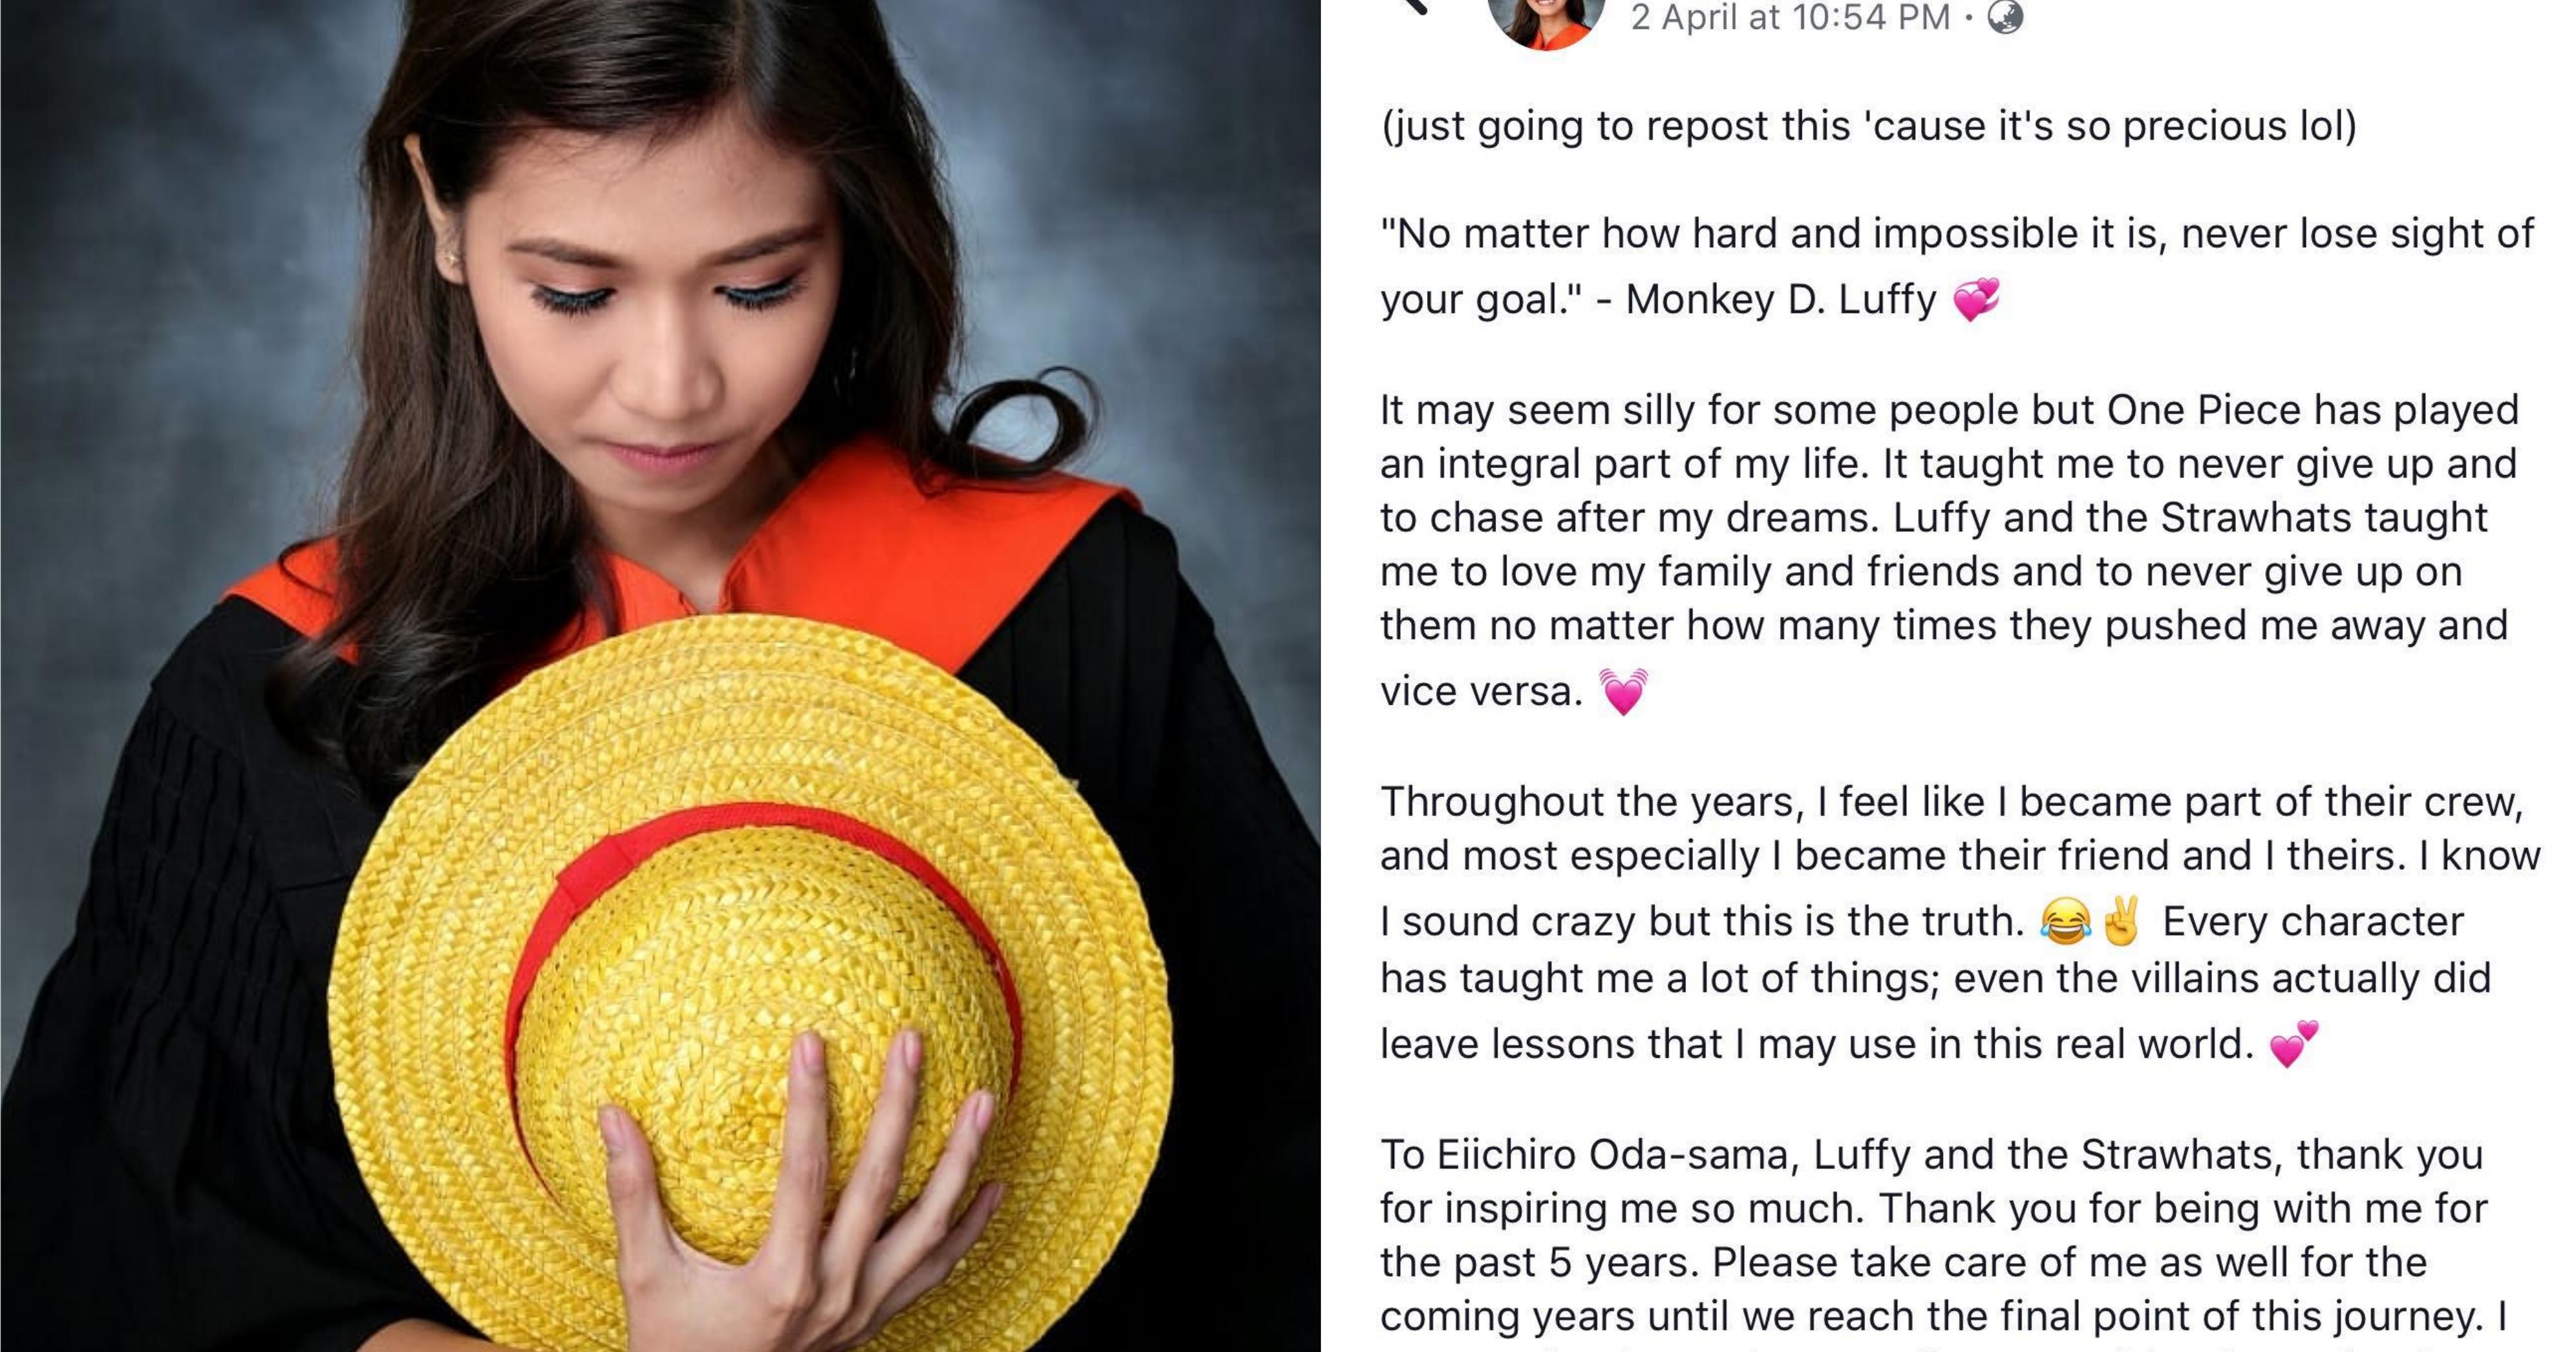 One Piece Fan Goes Viral For Meaningful Straw Hat Graduation Photo Tribute To Characters Mothership Sg News From Singapore Asia And Around The World